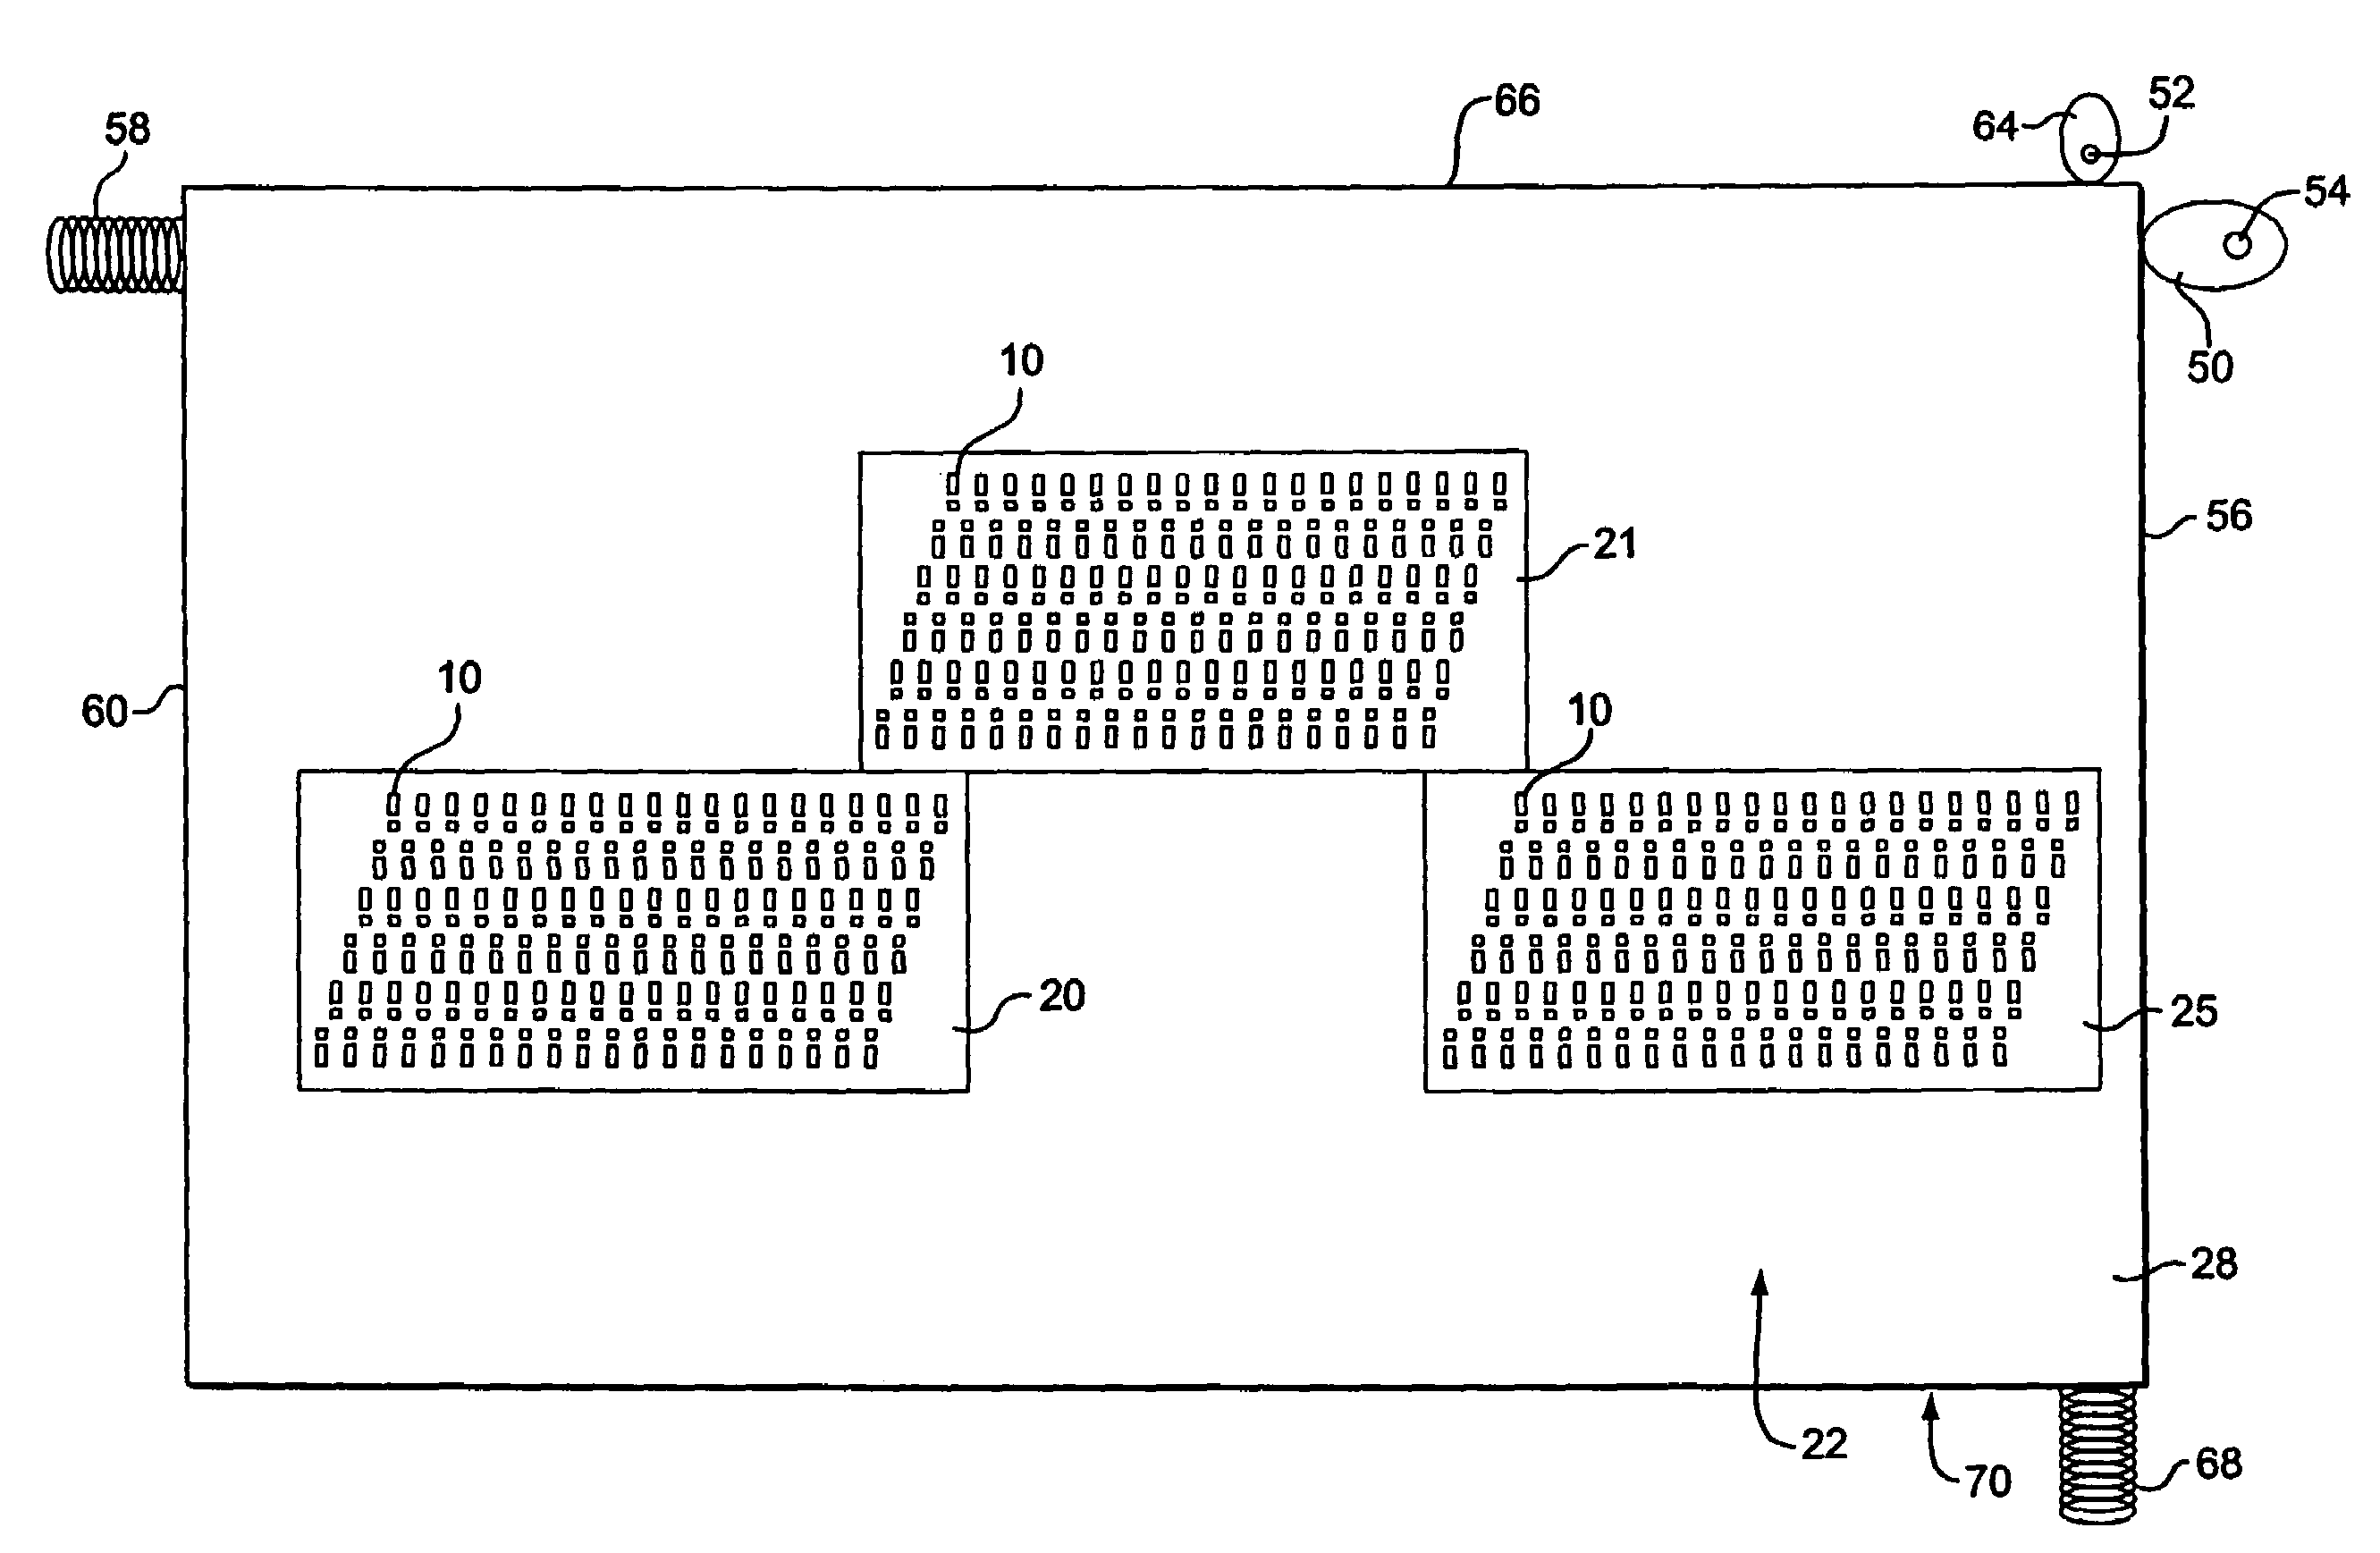 Light emitting apparatus and method for curing inks, coatings and adhesives